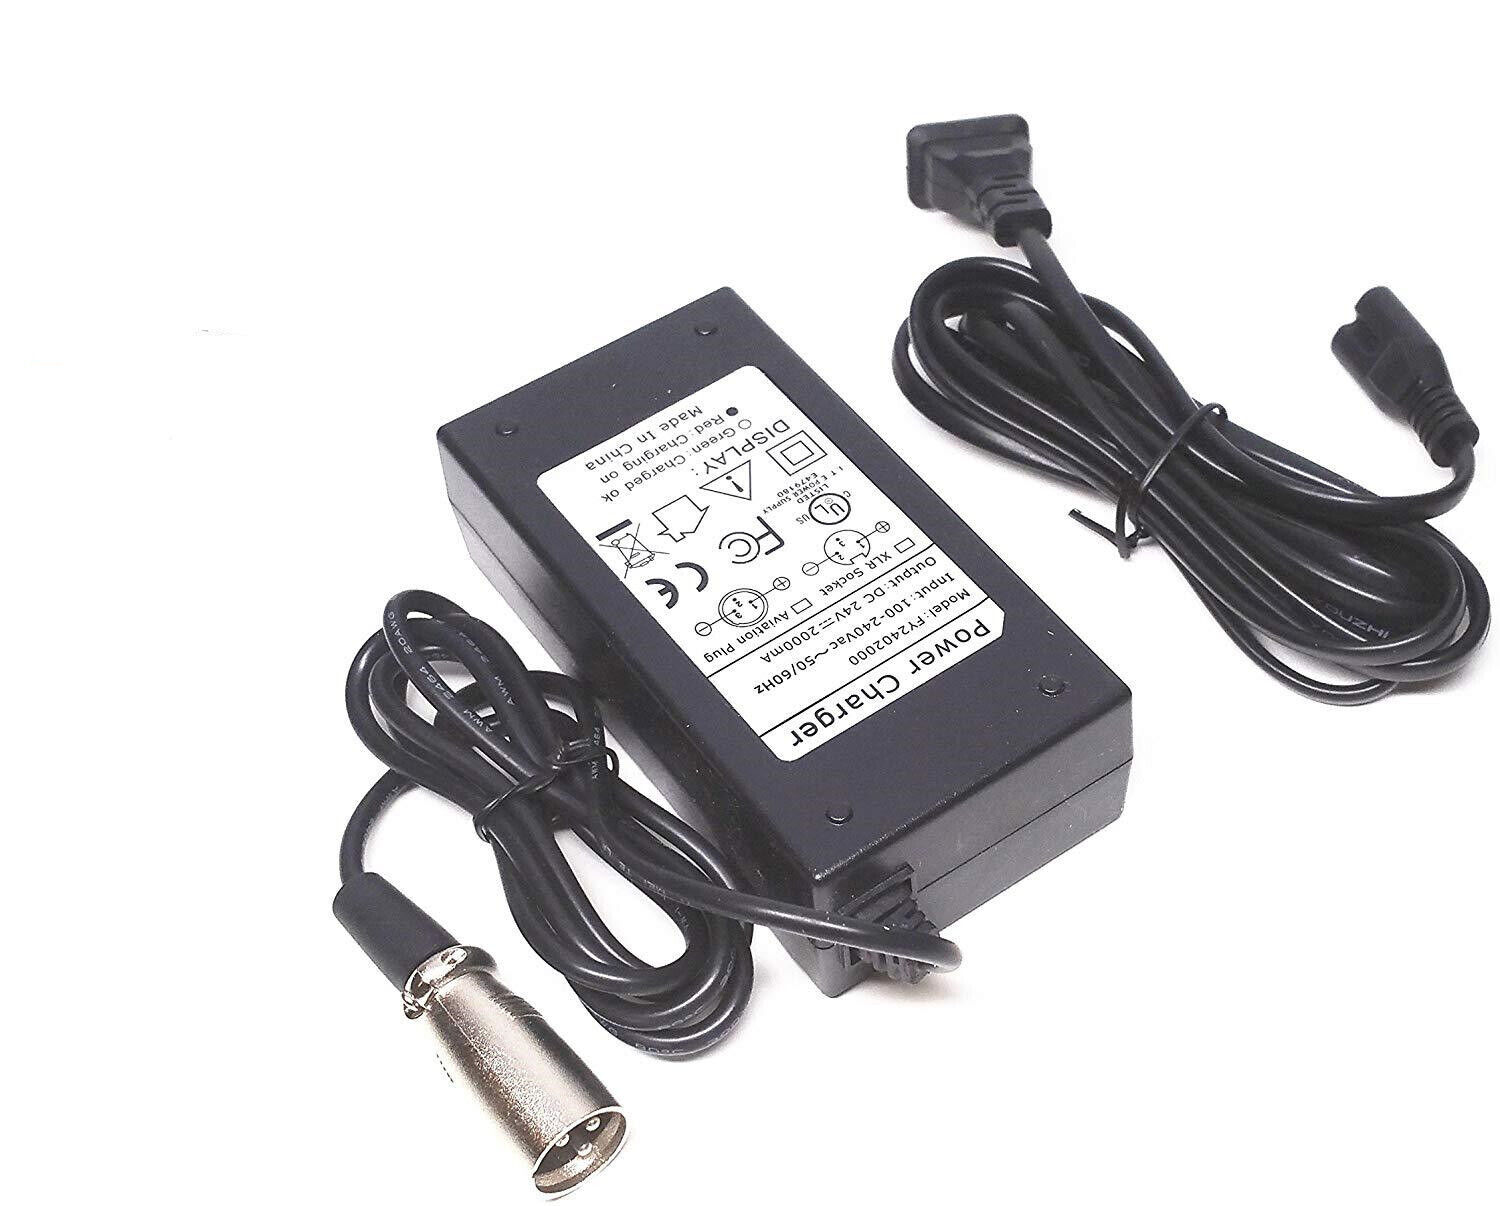 XLR 24V AC Adapter For 24VDC 2A Auto Offboard Scooter Wheelchair Battery Charger